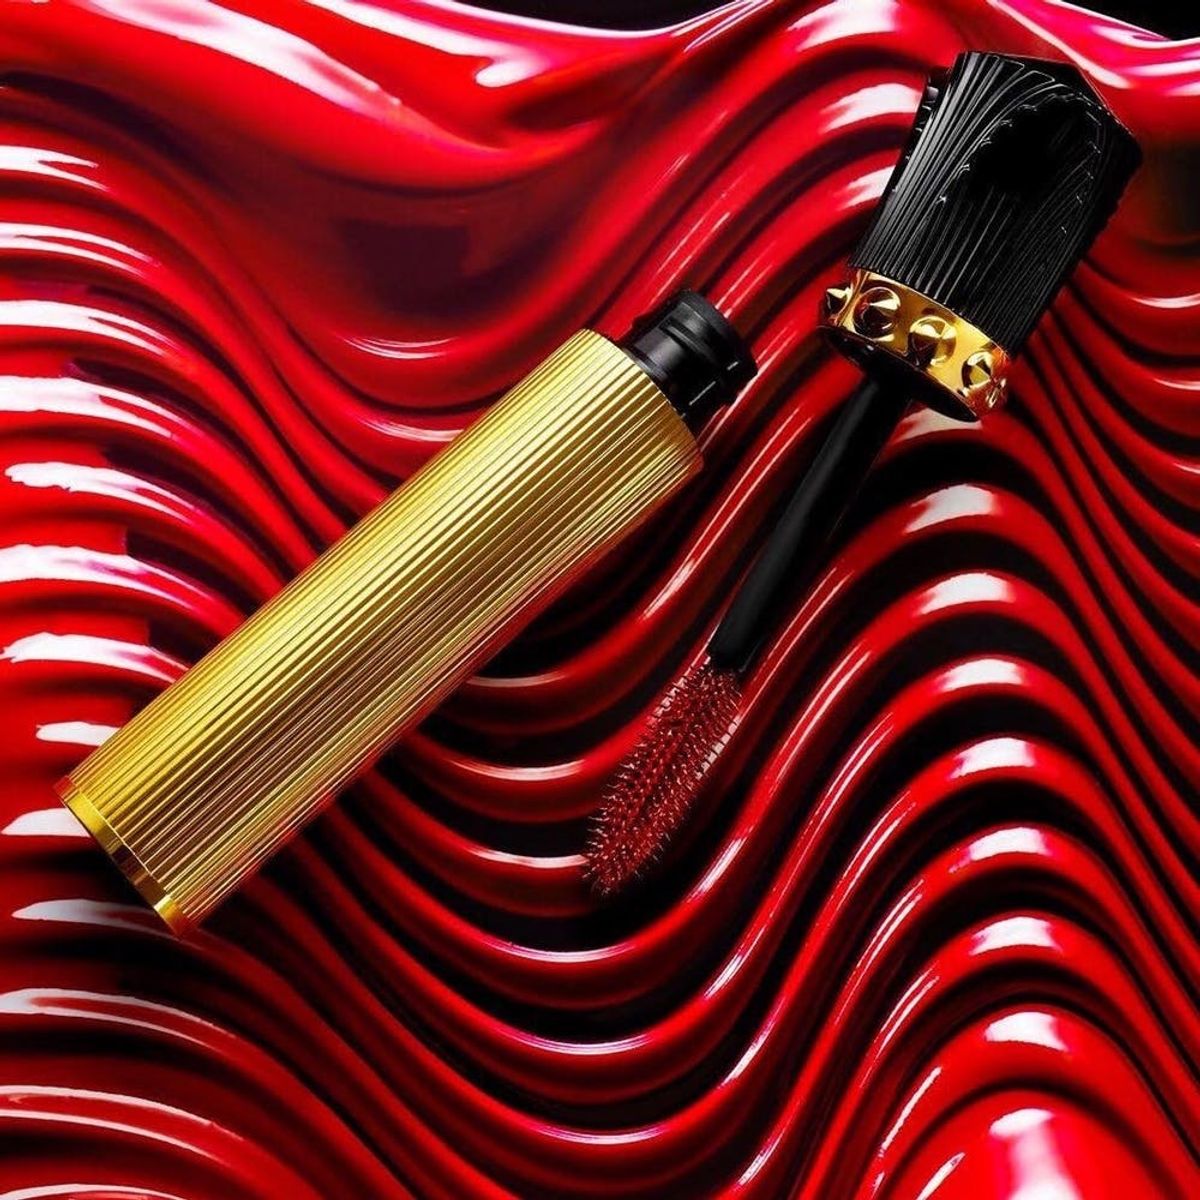 What You Can Expect from the Christian Louboutin Beaute Red Mascara